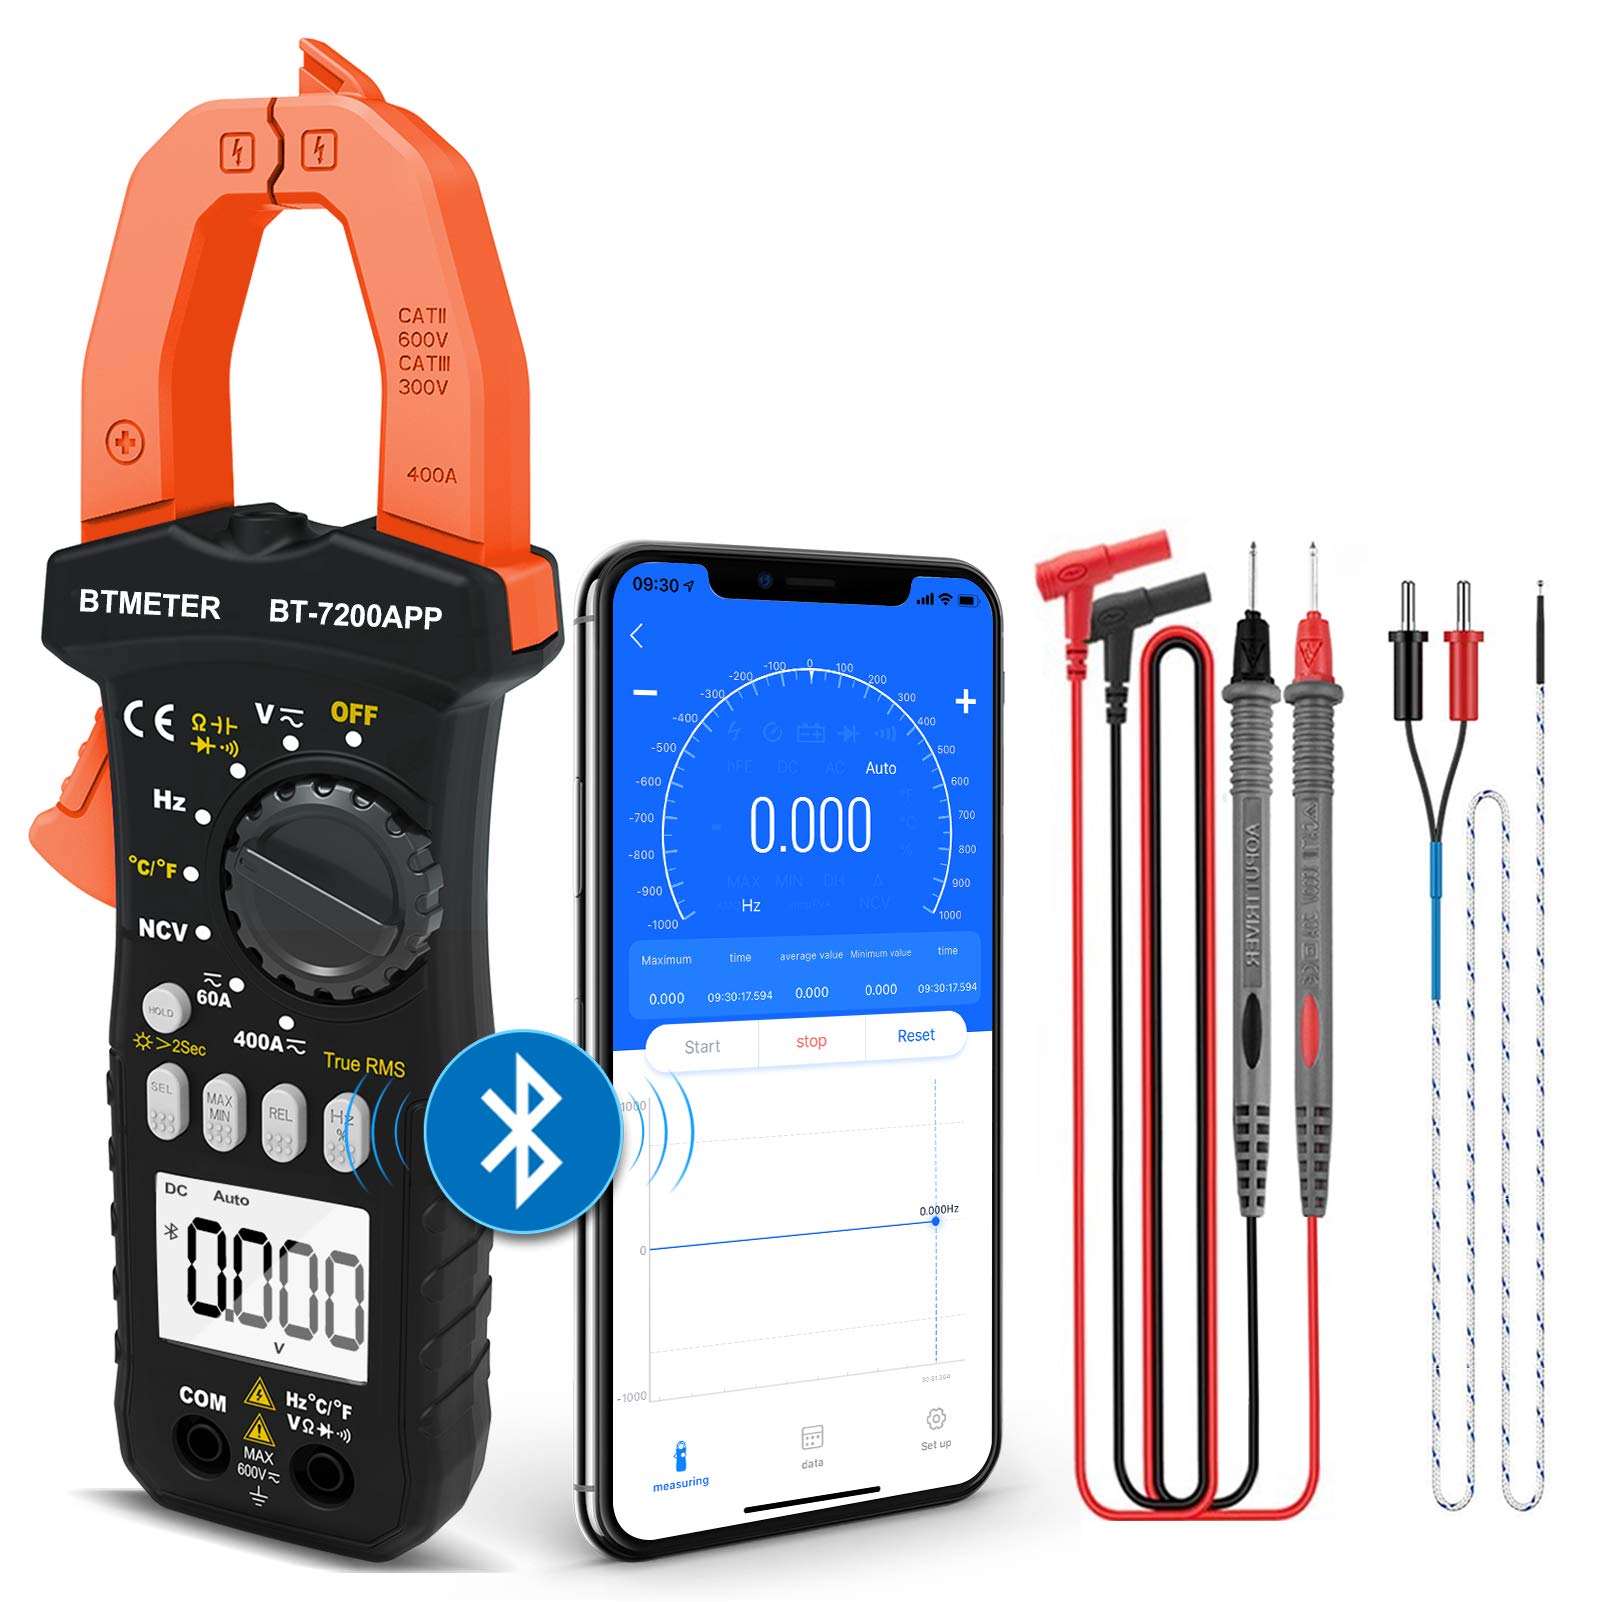 BTMETER BT-7200APP TRMS 6000 Counts Clamp Multimeter, Digital Clamp-on Ammeter for AC/DC Current Voltage Resistance Capacitor Frequency Continuity Temperature NCV Meter